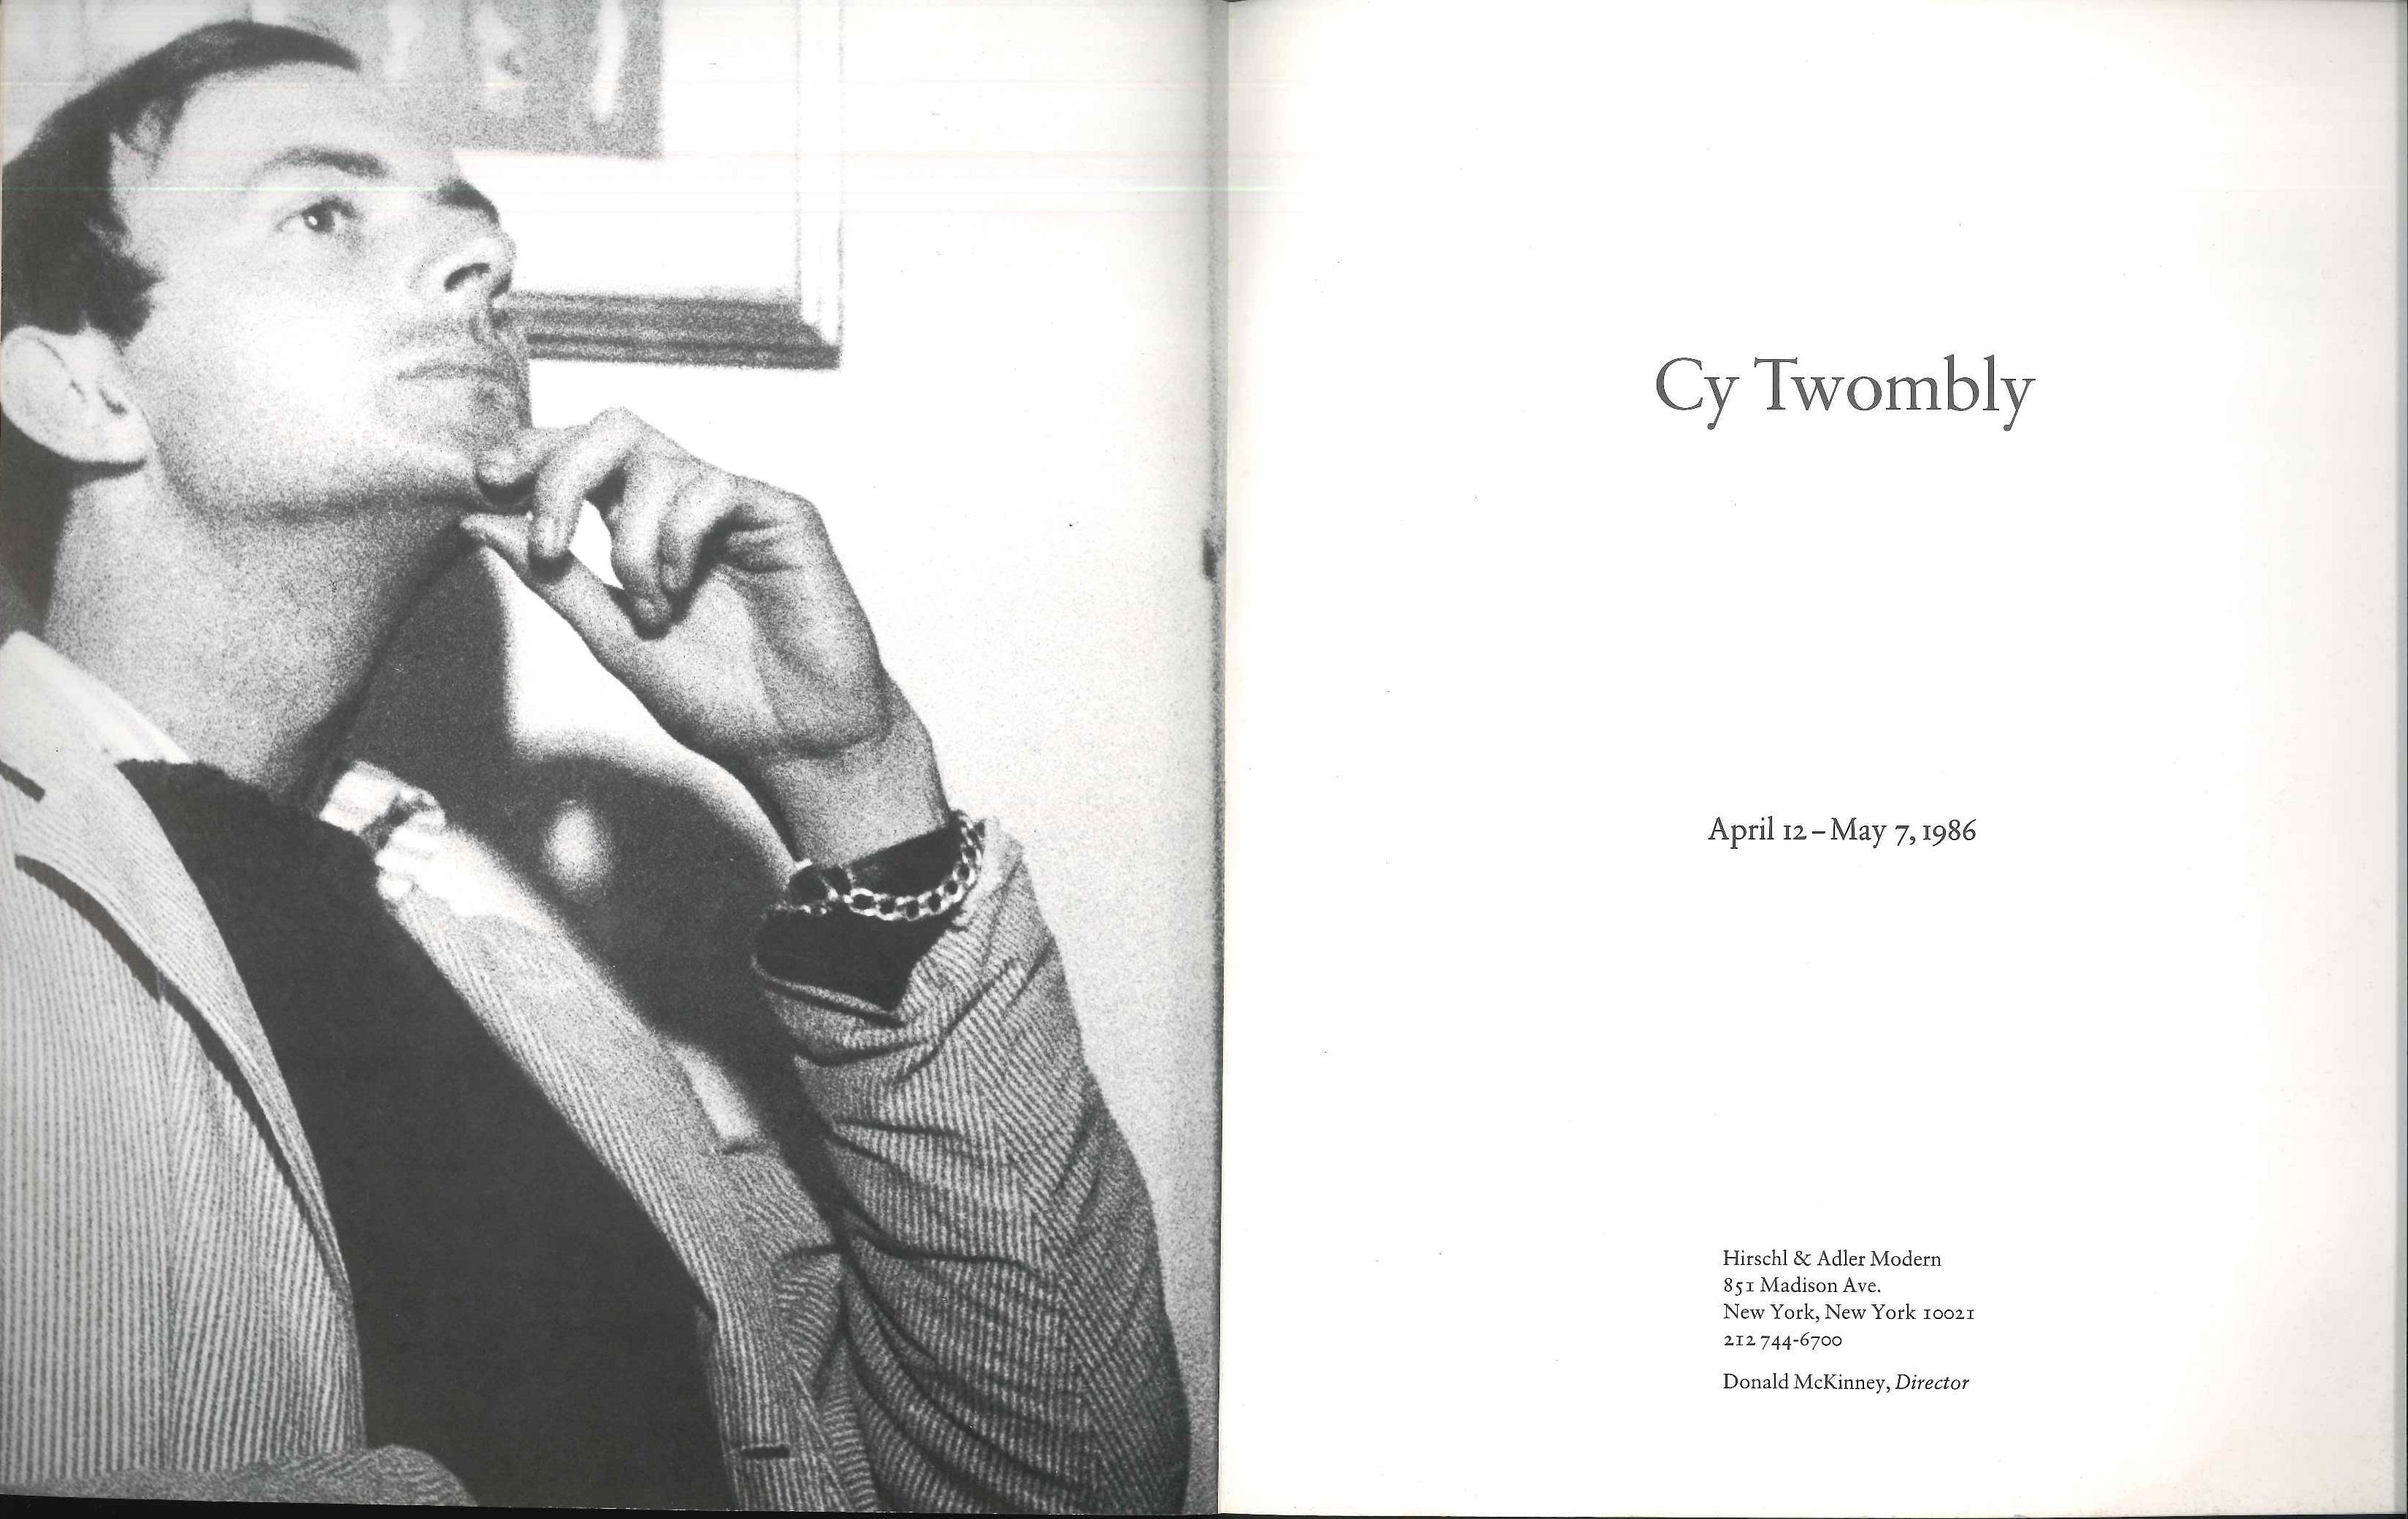 Very rare and precious Catalog of Cy Twombly for the solo exhibition of the American artist (from April 12 - May 7, 1986).
Published in 1986 by Hirschl and Adler Modern Gallery, New York. Text by Roberta Smith. In English. In 8º, unnumbered